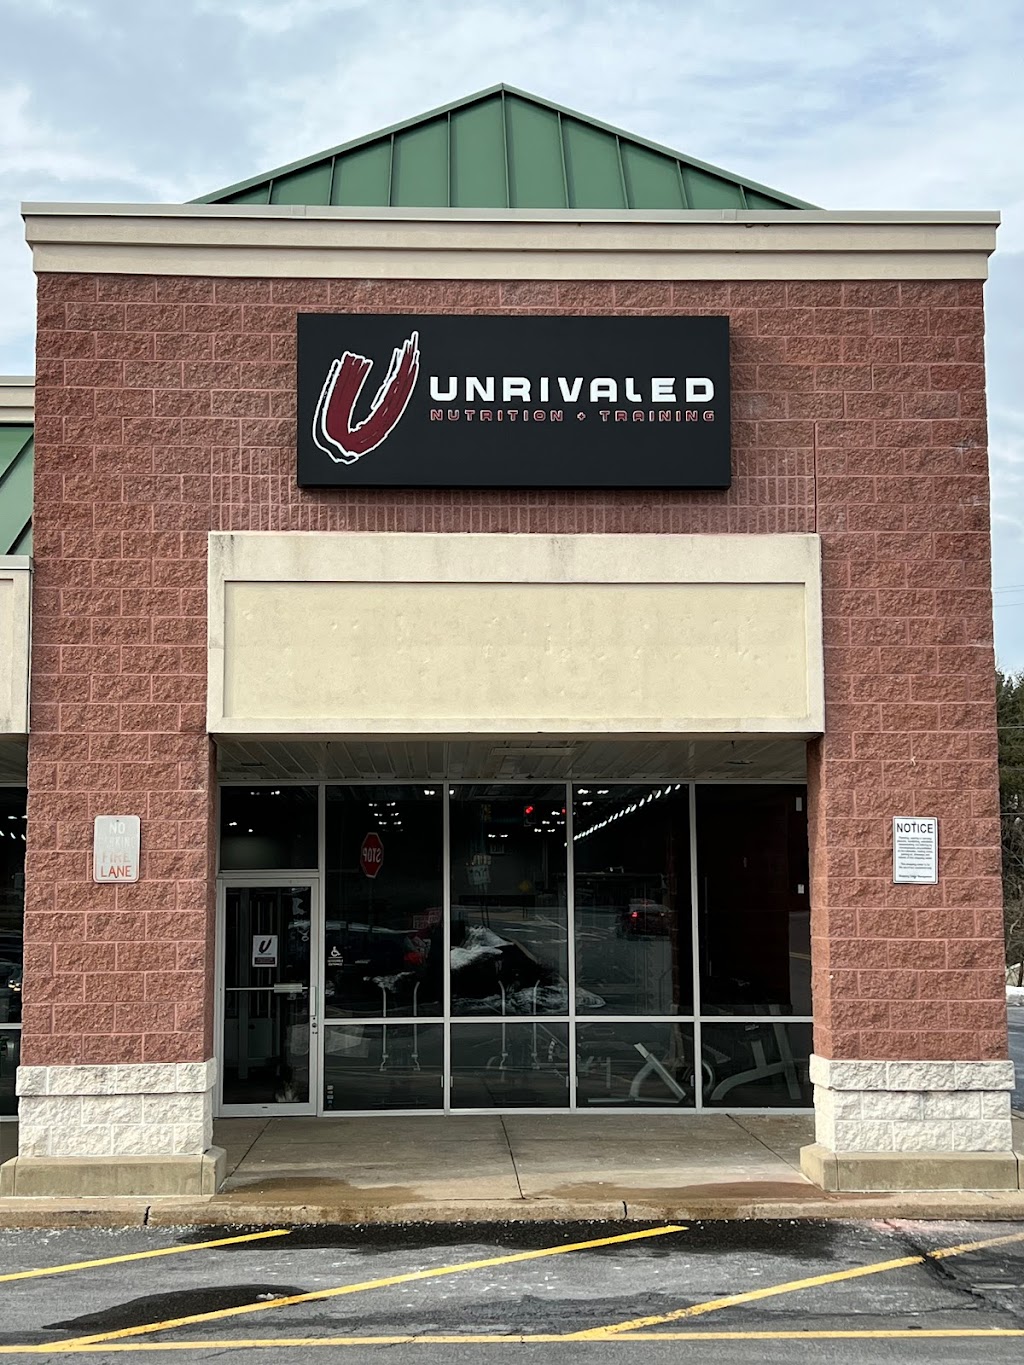 Unrivaled Nutrition + Training | 1854 Leithsville Rd, Hellertown, PA 18055 | Phone: (610) 214-2388